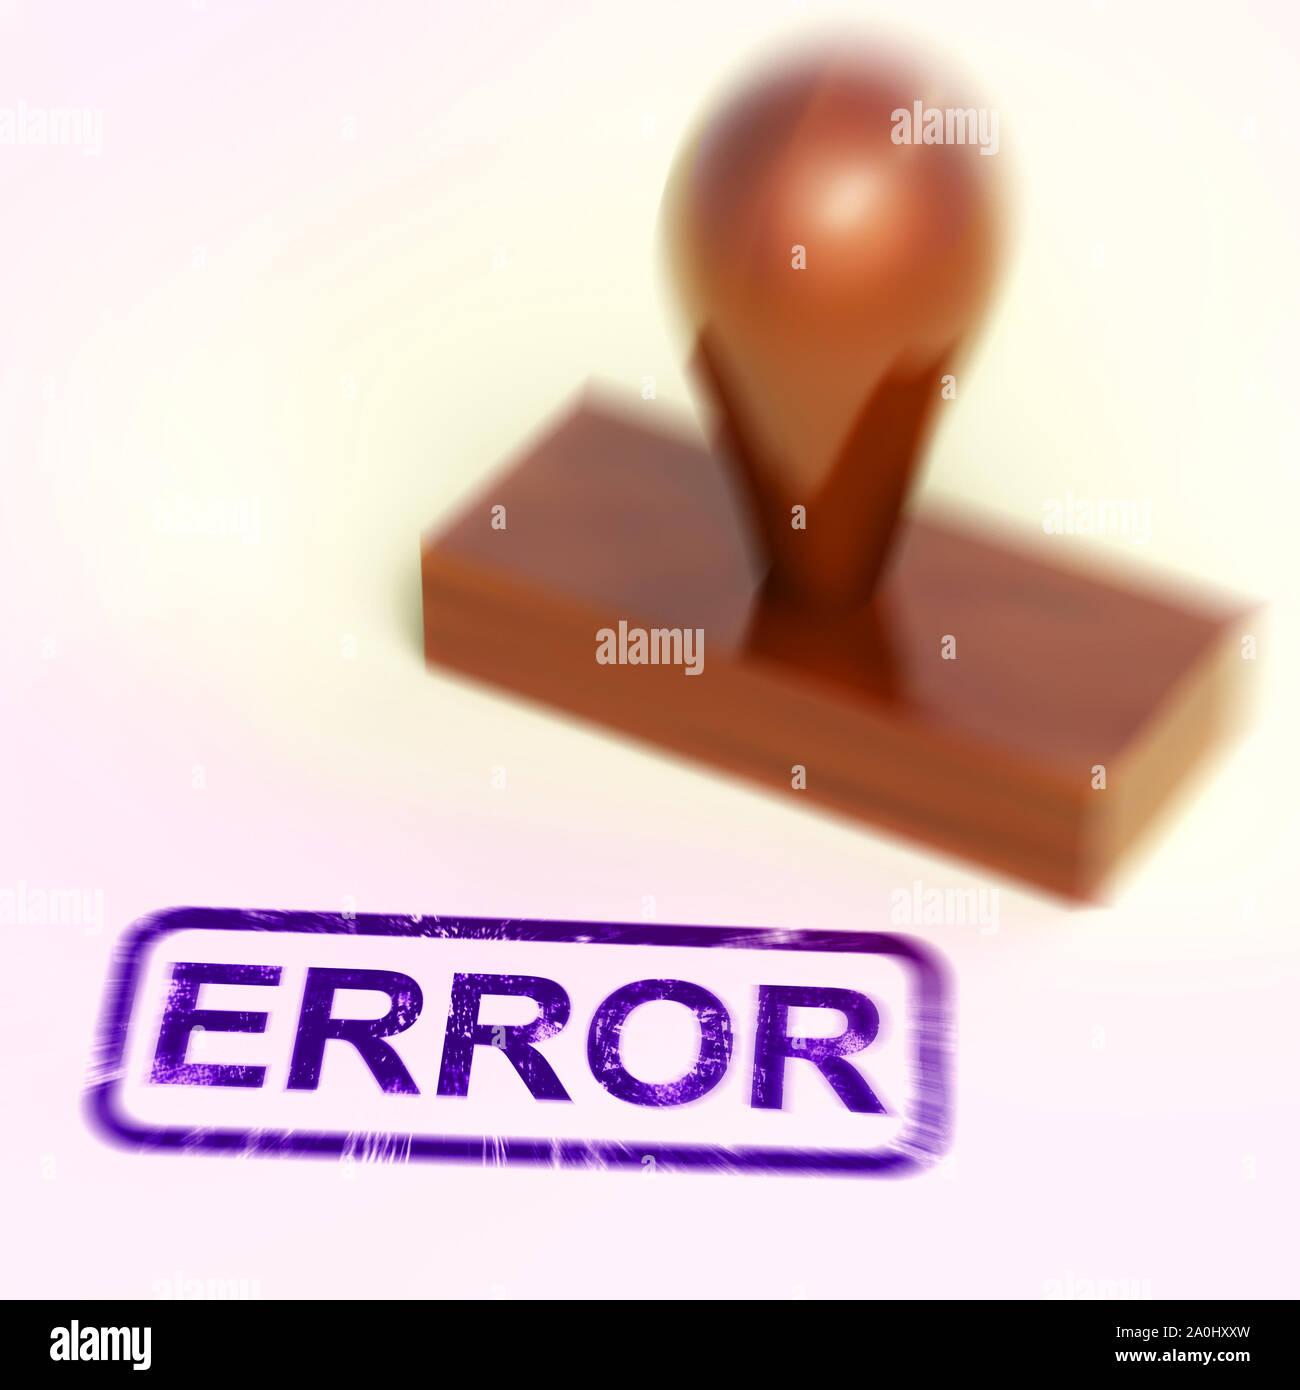 Error stamp used to mark mistakes and faults. Alert to problem or failure warning - 3d illustration Stock Photo